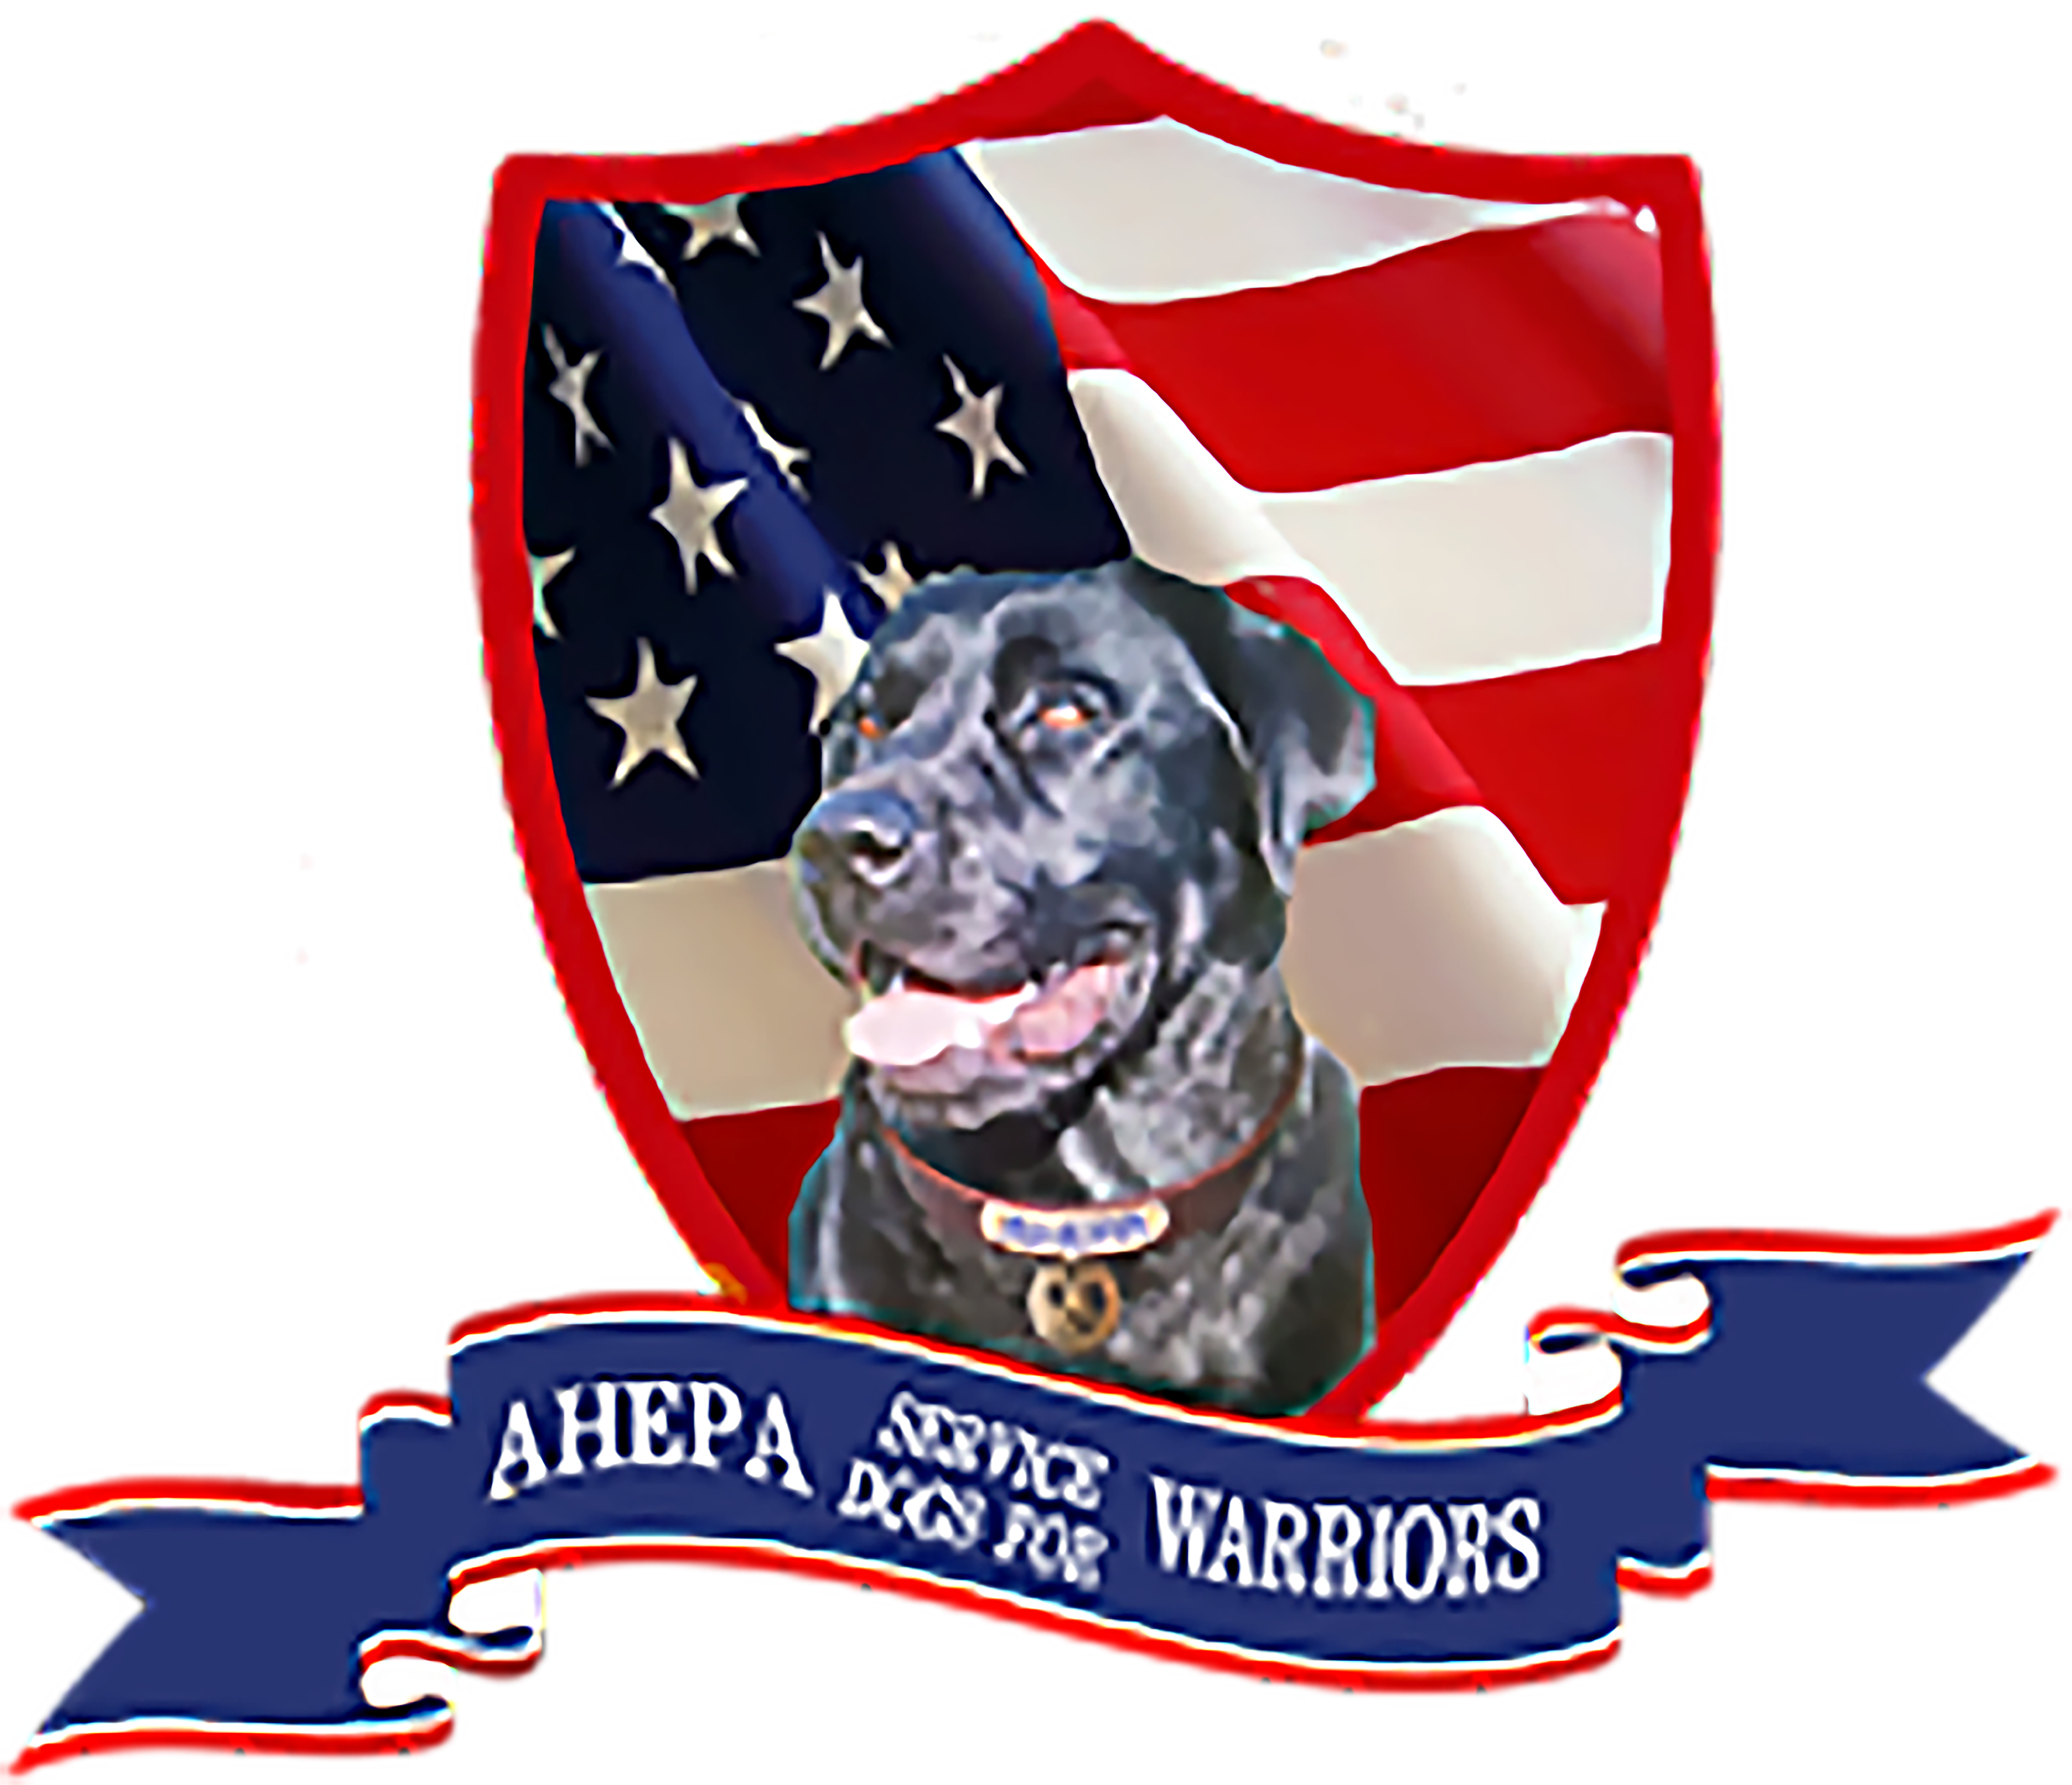 AHEPA Service Dogs for Warriors